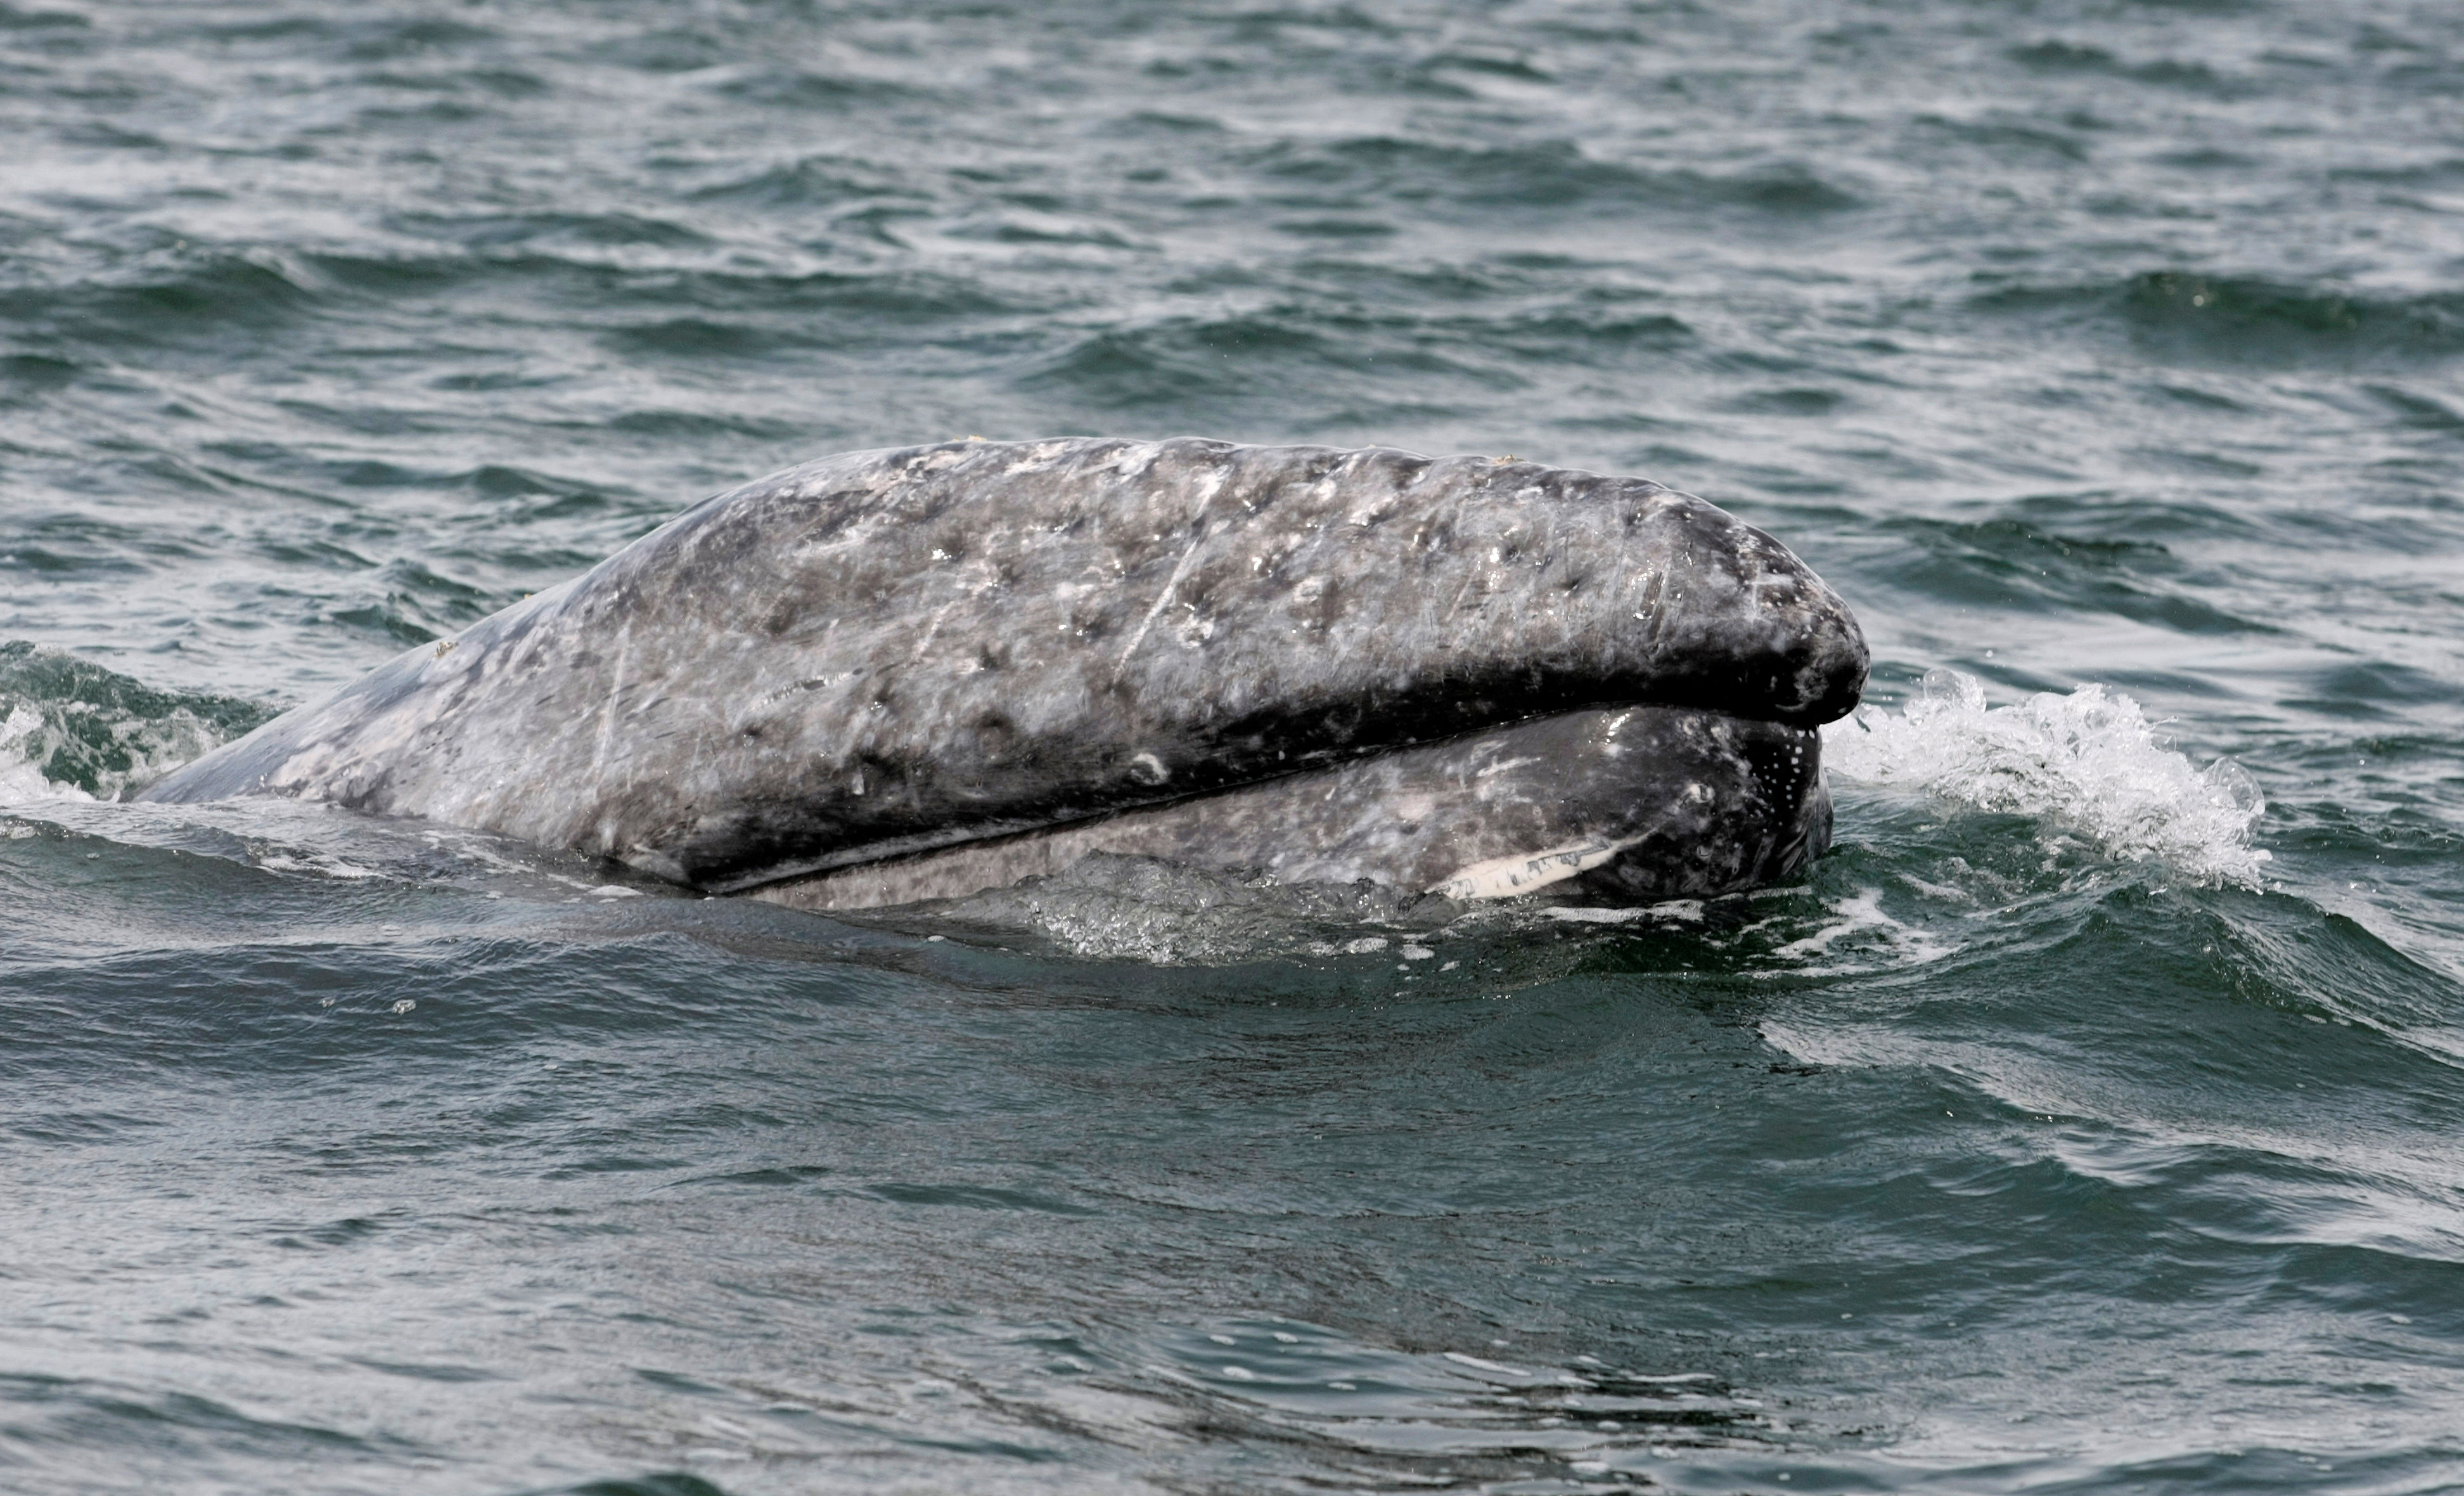 Hopeful signs for declining population of gray whales along West